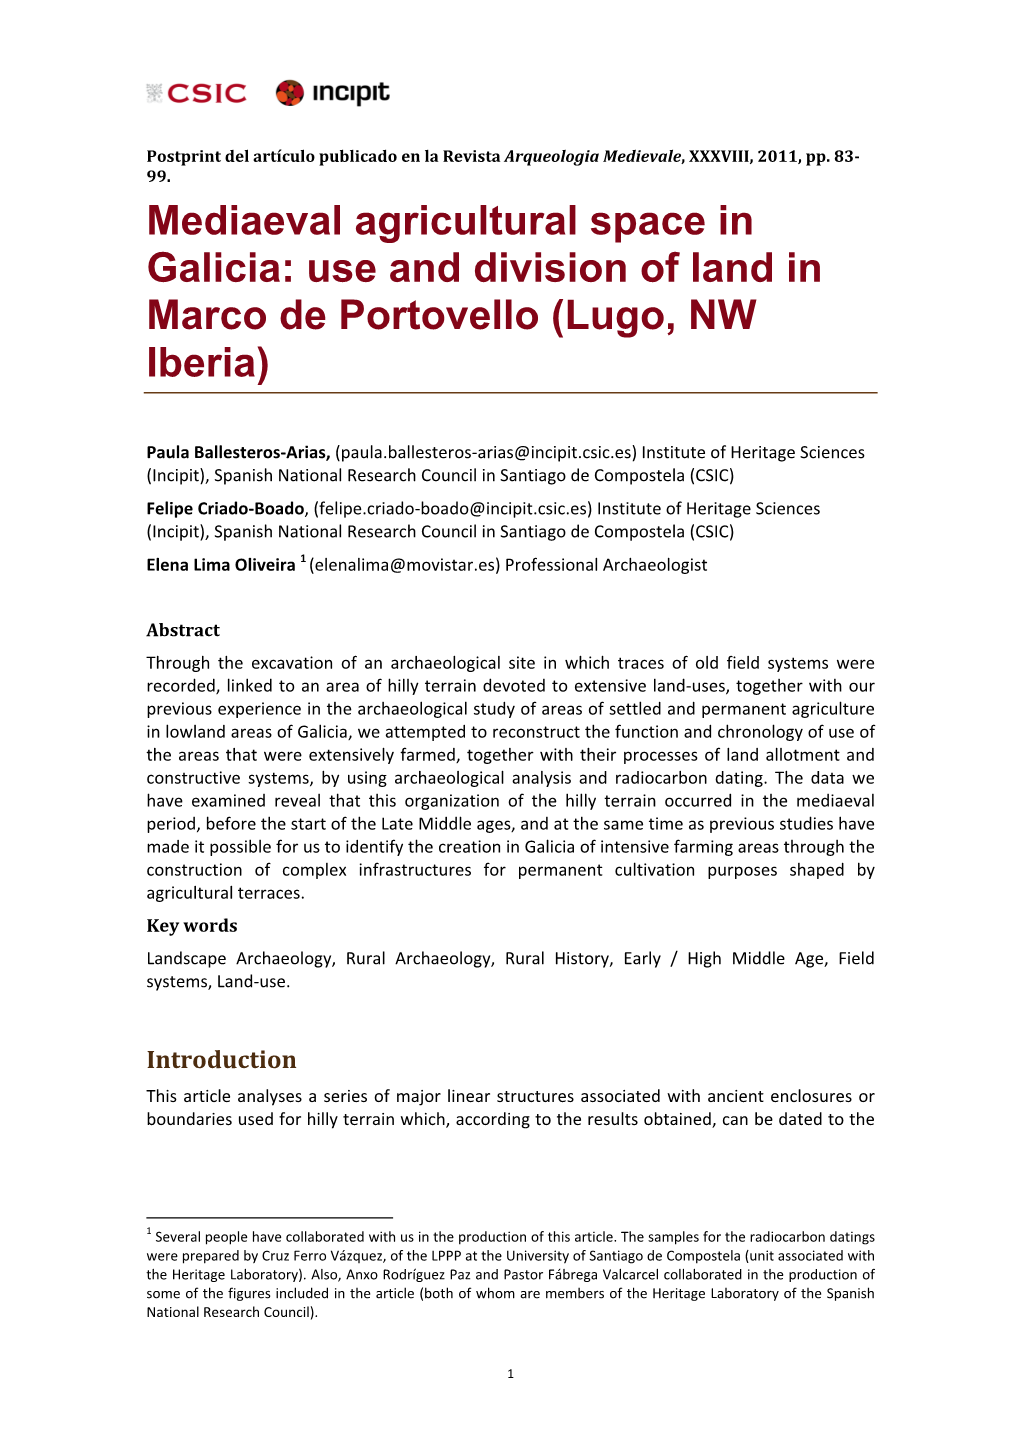 Mediaeval Agricultural Space in Galicia: Use and Division of Land in Marco De Portovello (Lugo, NW Iberia)